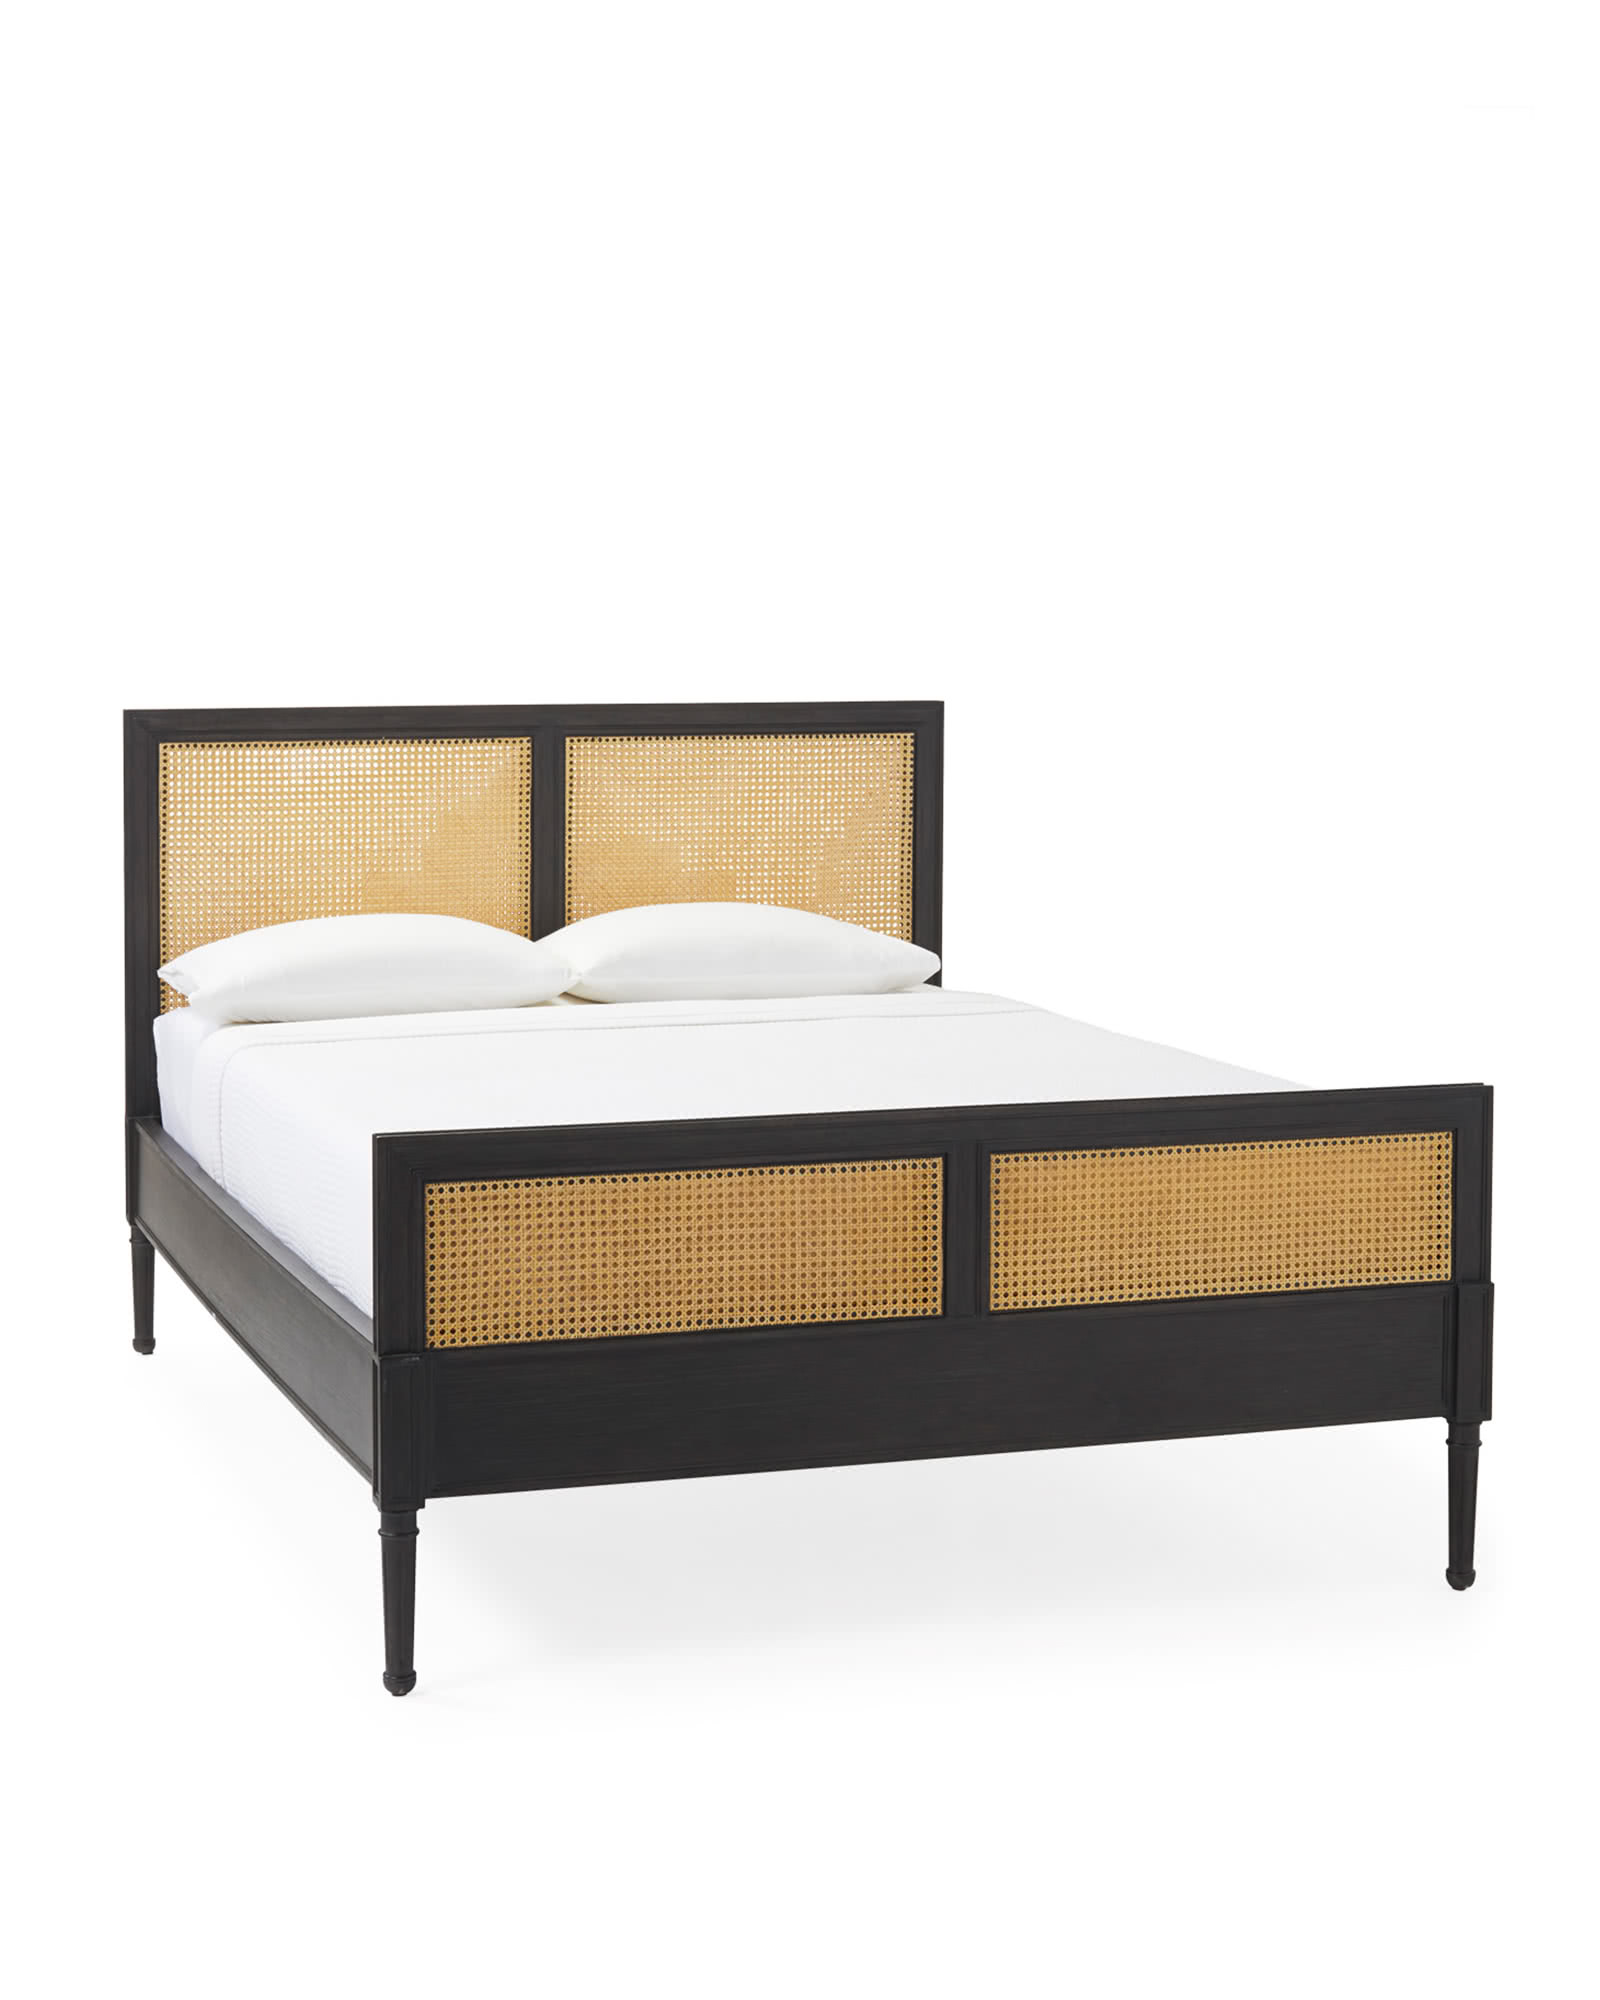 Woven Rattan Bed Frame